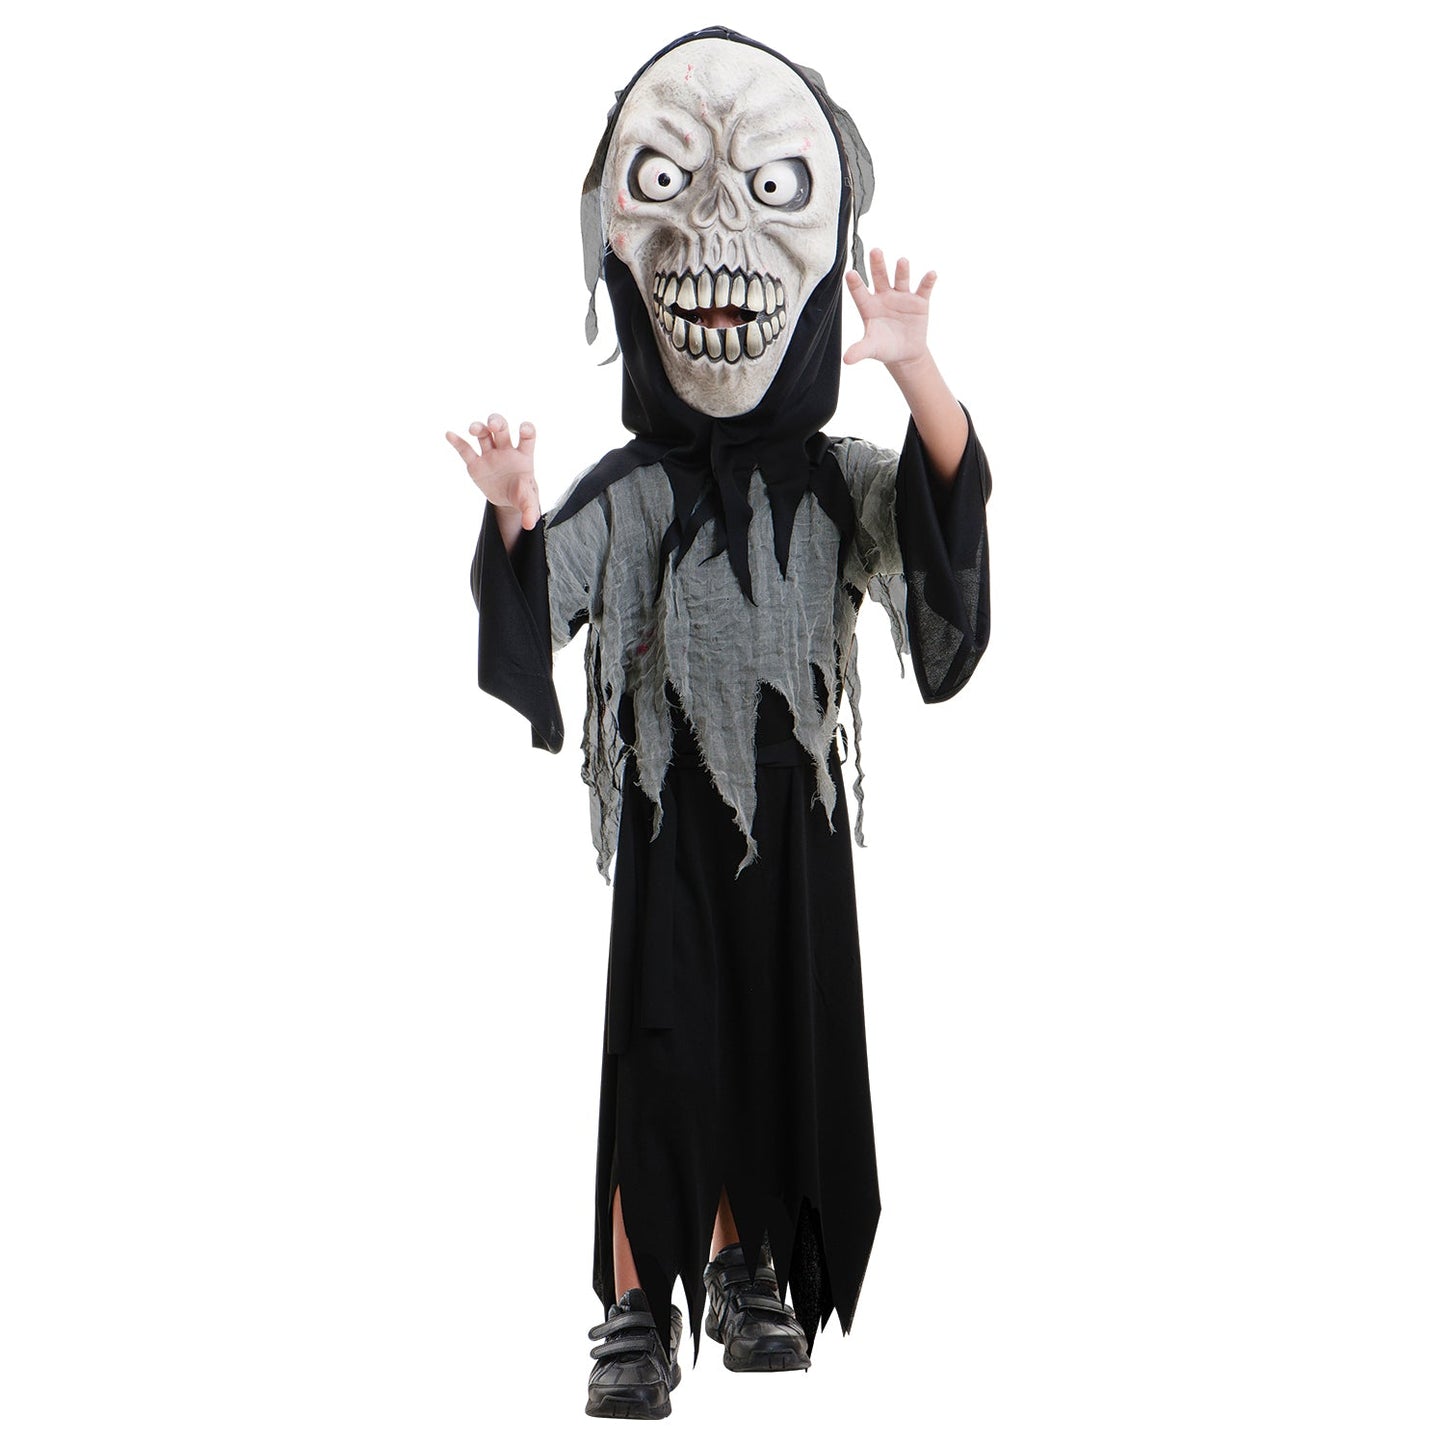 Boys Fright Ghoul Halloween Costume includes robe and mask